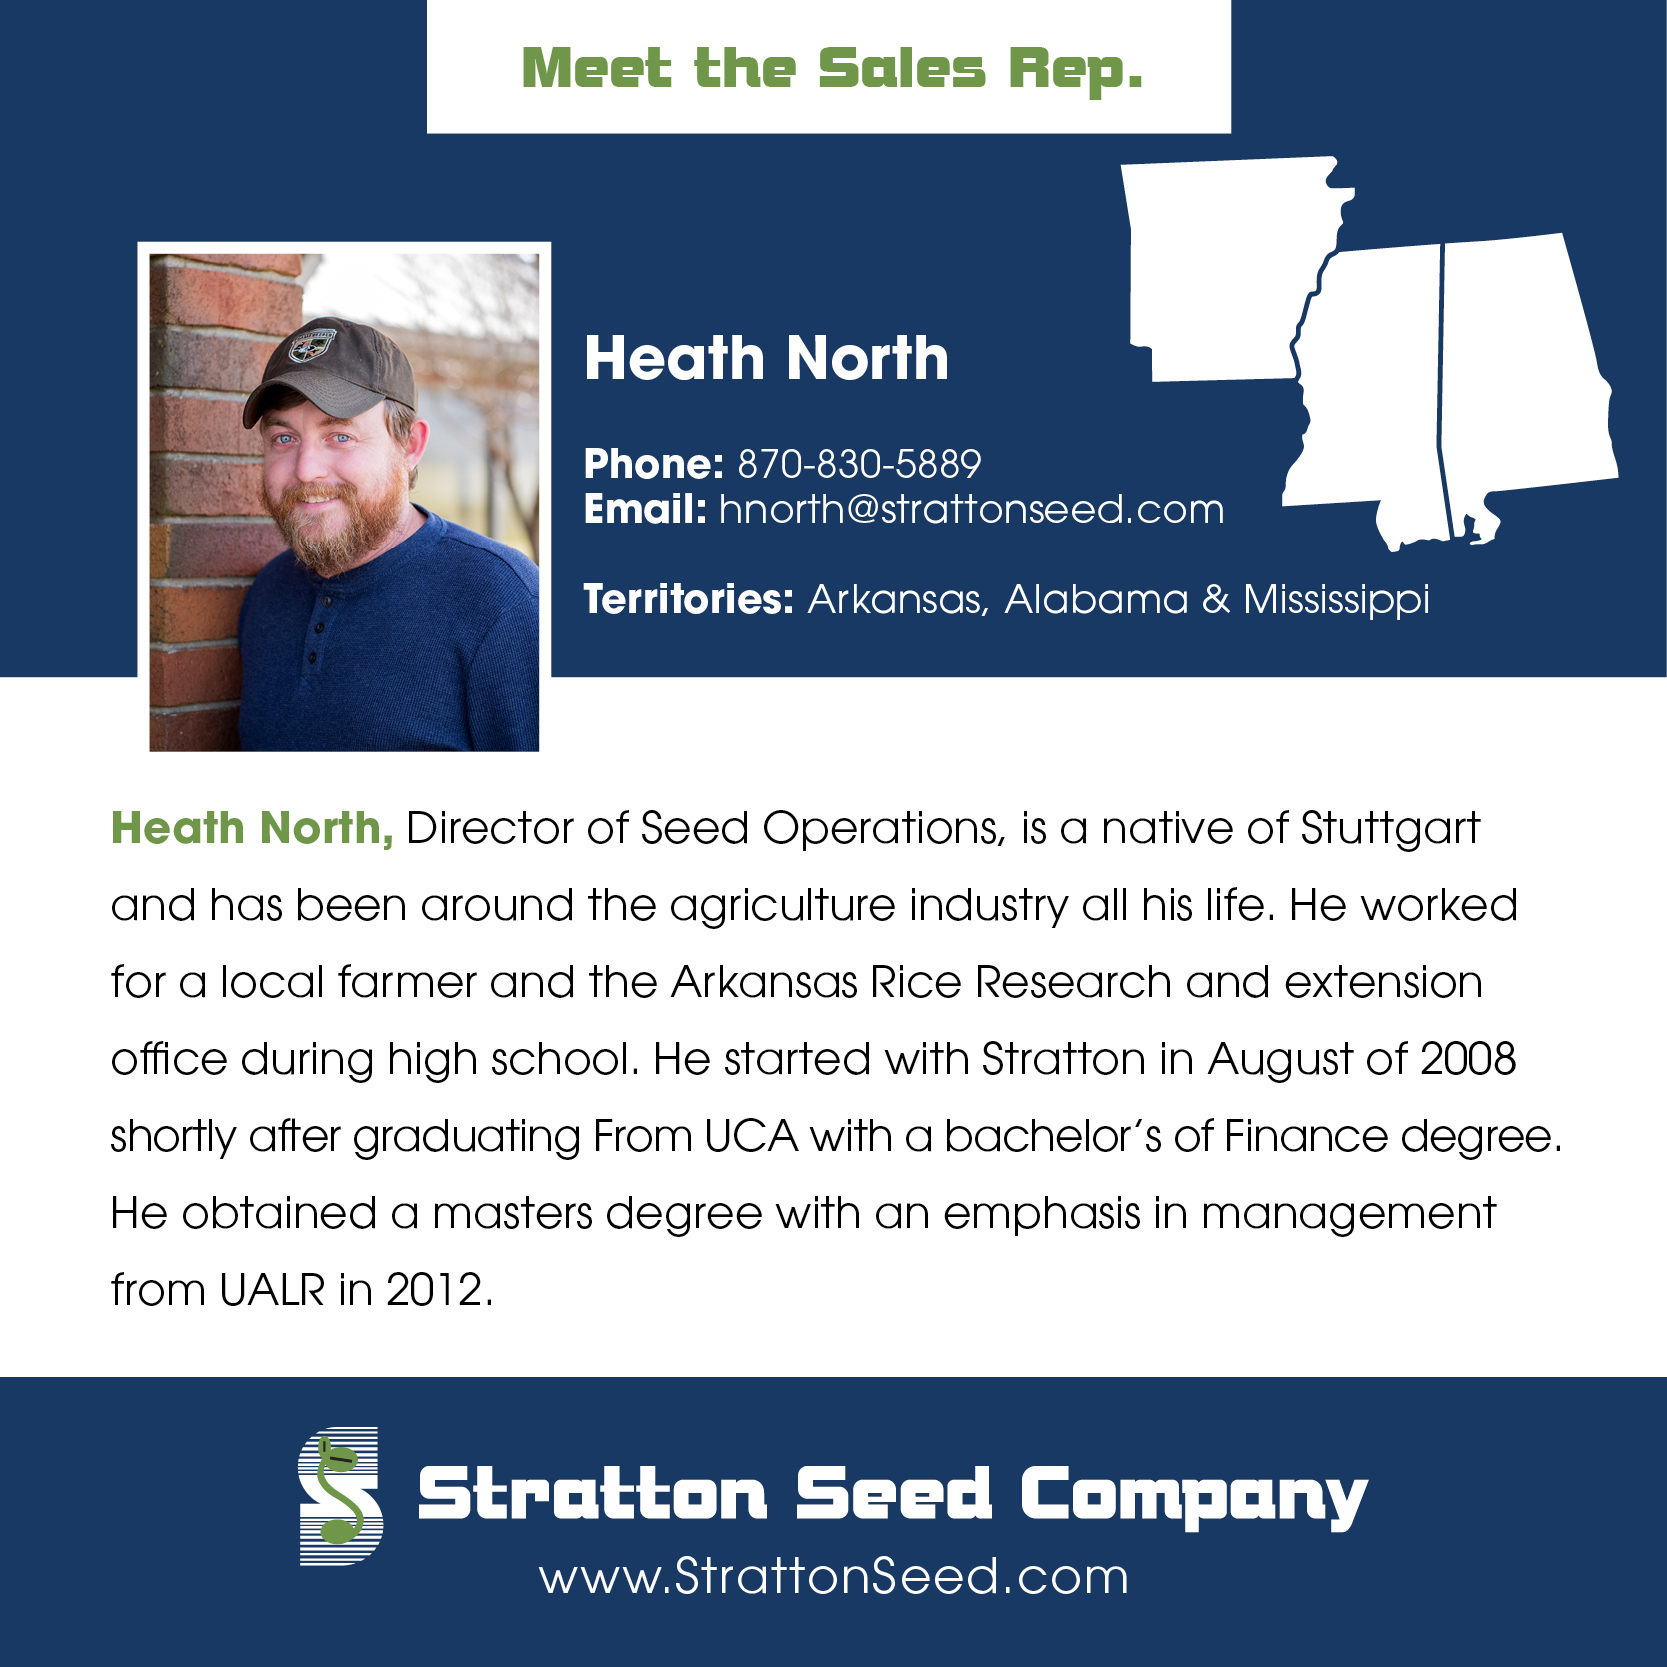 Meet the reps series featuring a Stratton rep and their territory and bio